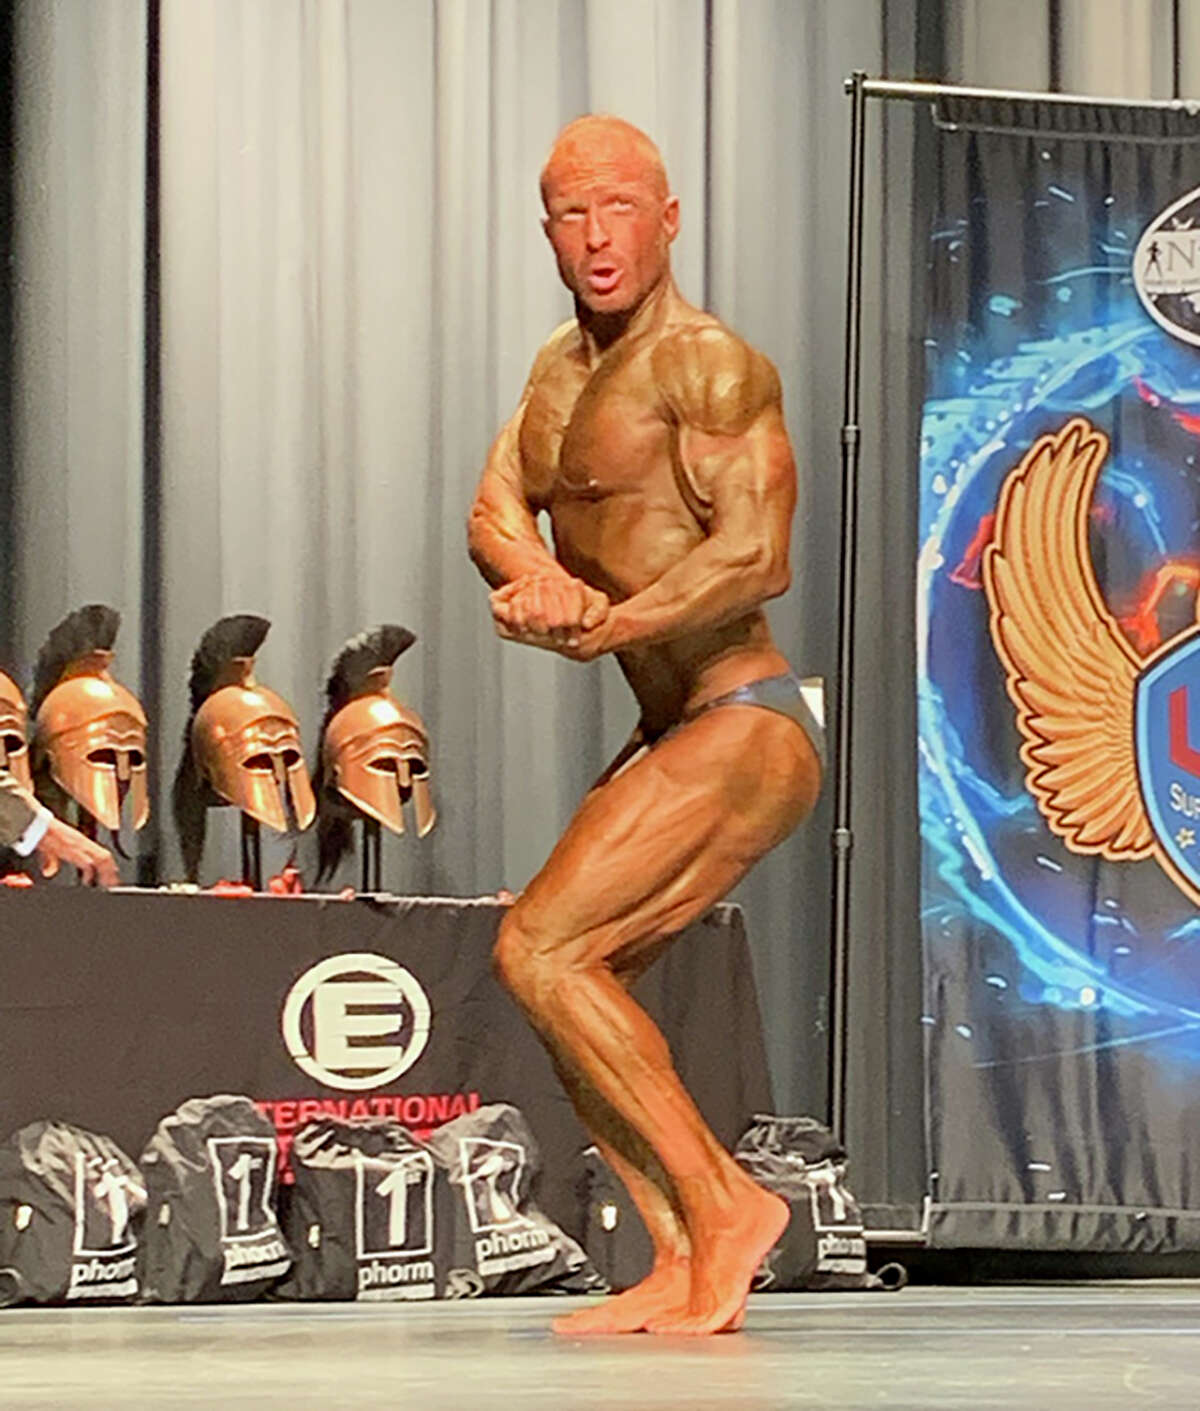 Bodybuilder Paul Nicolussi, a 1996 Edwardsville High School graduate, took first place at the IPE (International Pro Elite) Masters World Championships Oct. 9 in Memphis, Tennessee.